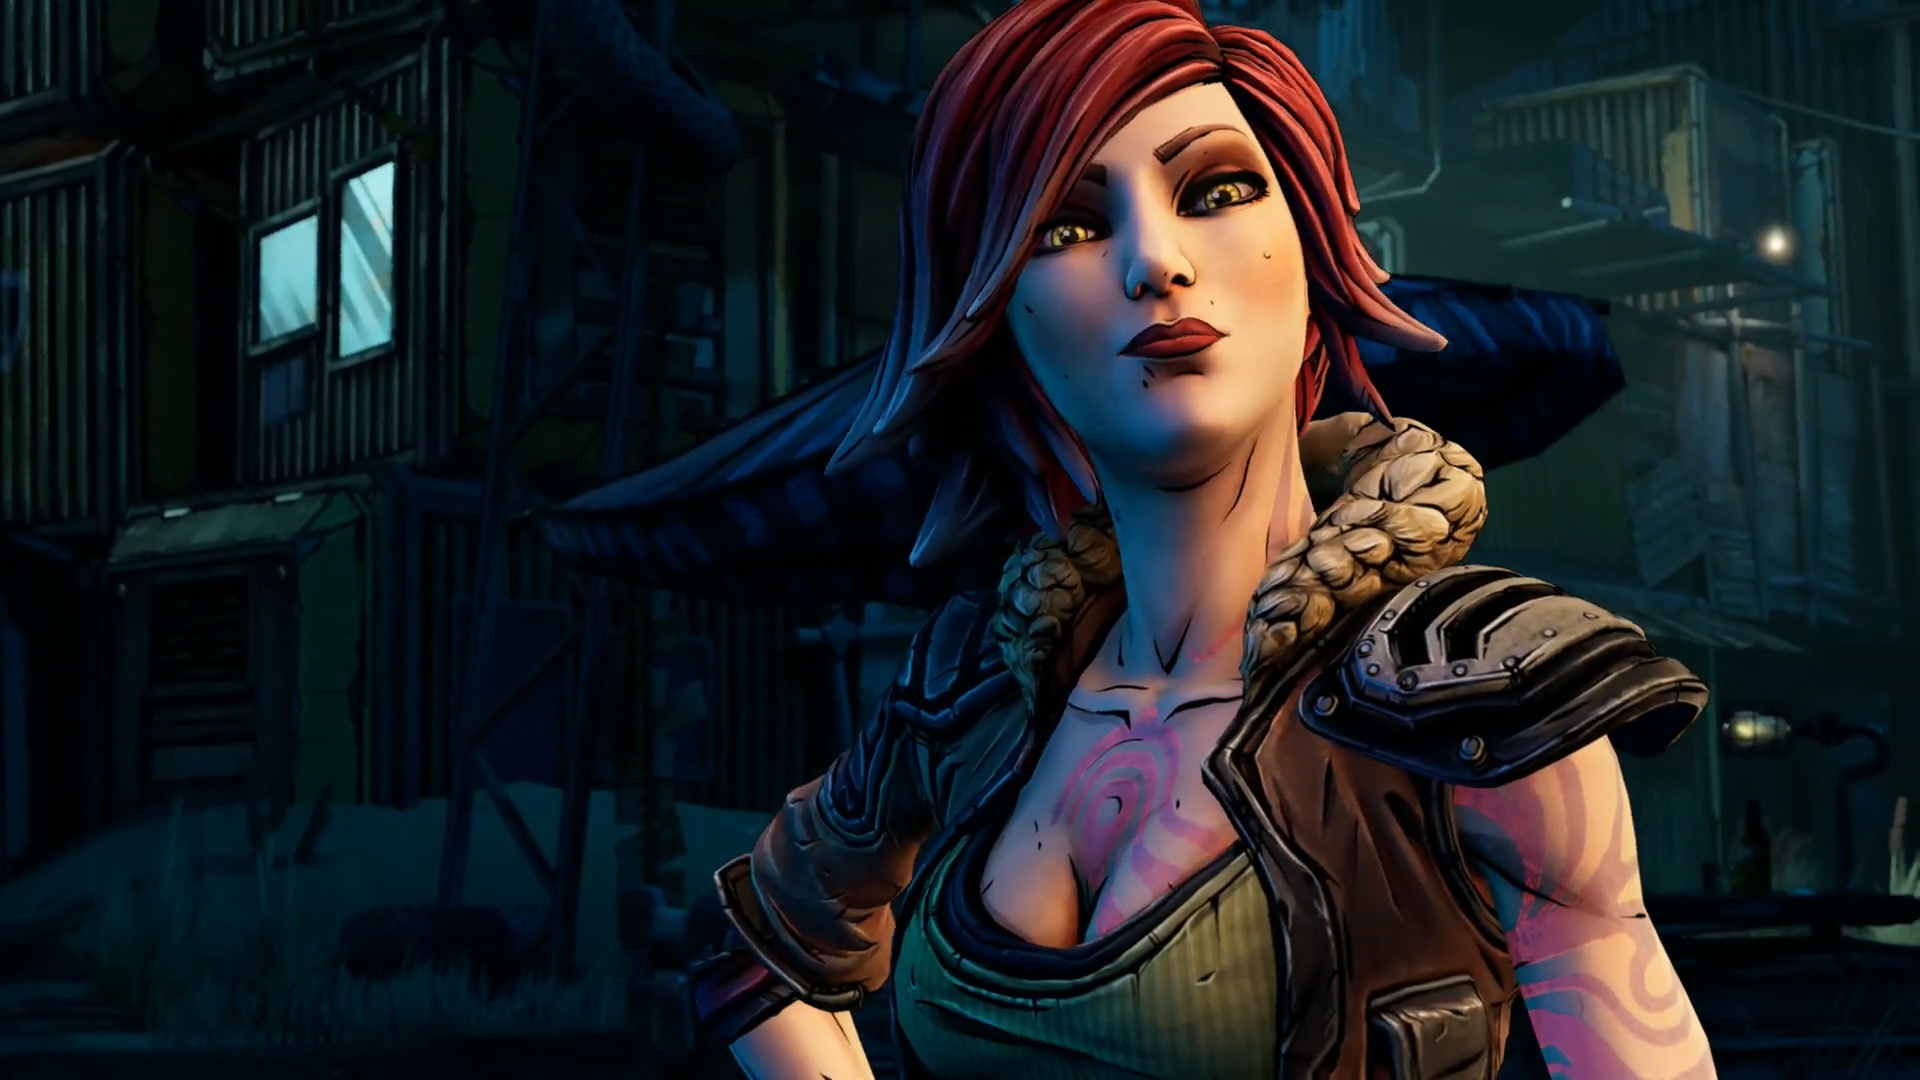 Borderlands: Cate Blanchett Re-Teams With Director Eli Roth For Video Game Adaptation